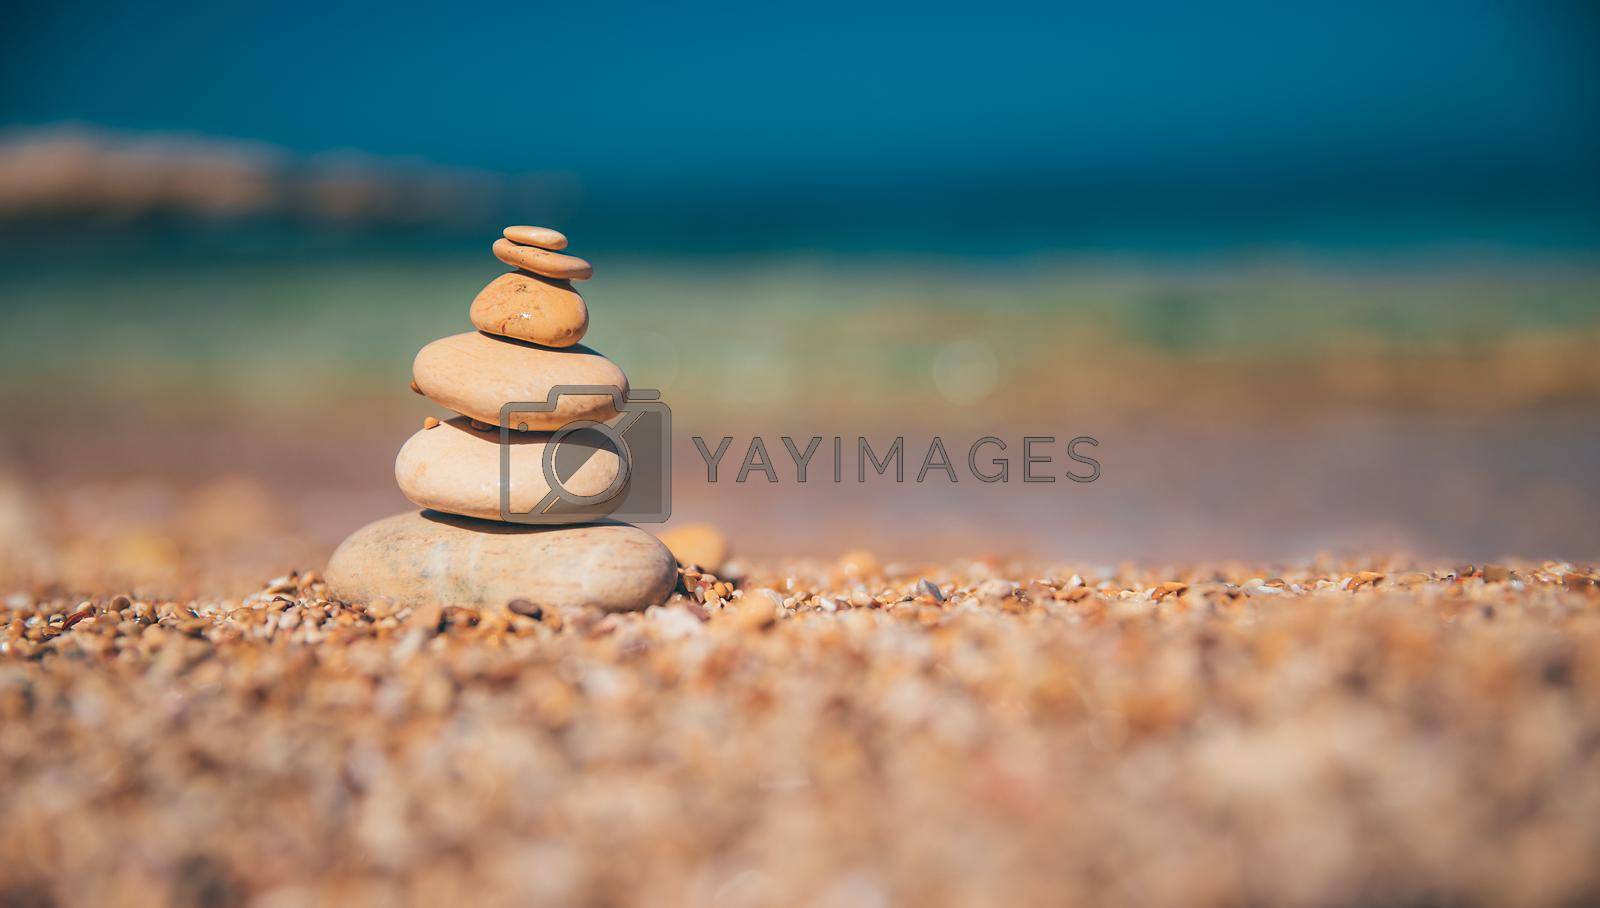 Pile of Pebbles over Beautiful Beach Background. Seashore of a Beach Resort. Peaceful Summer Vacation. Meditation and Zen Balance Concept.